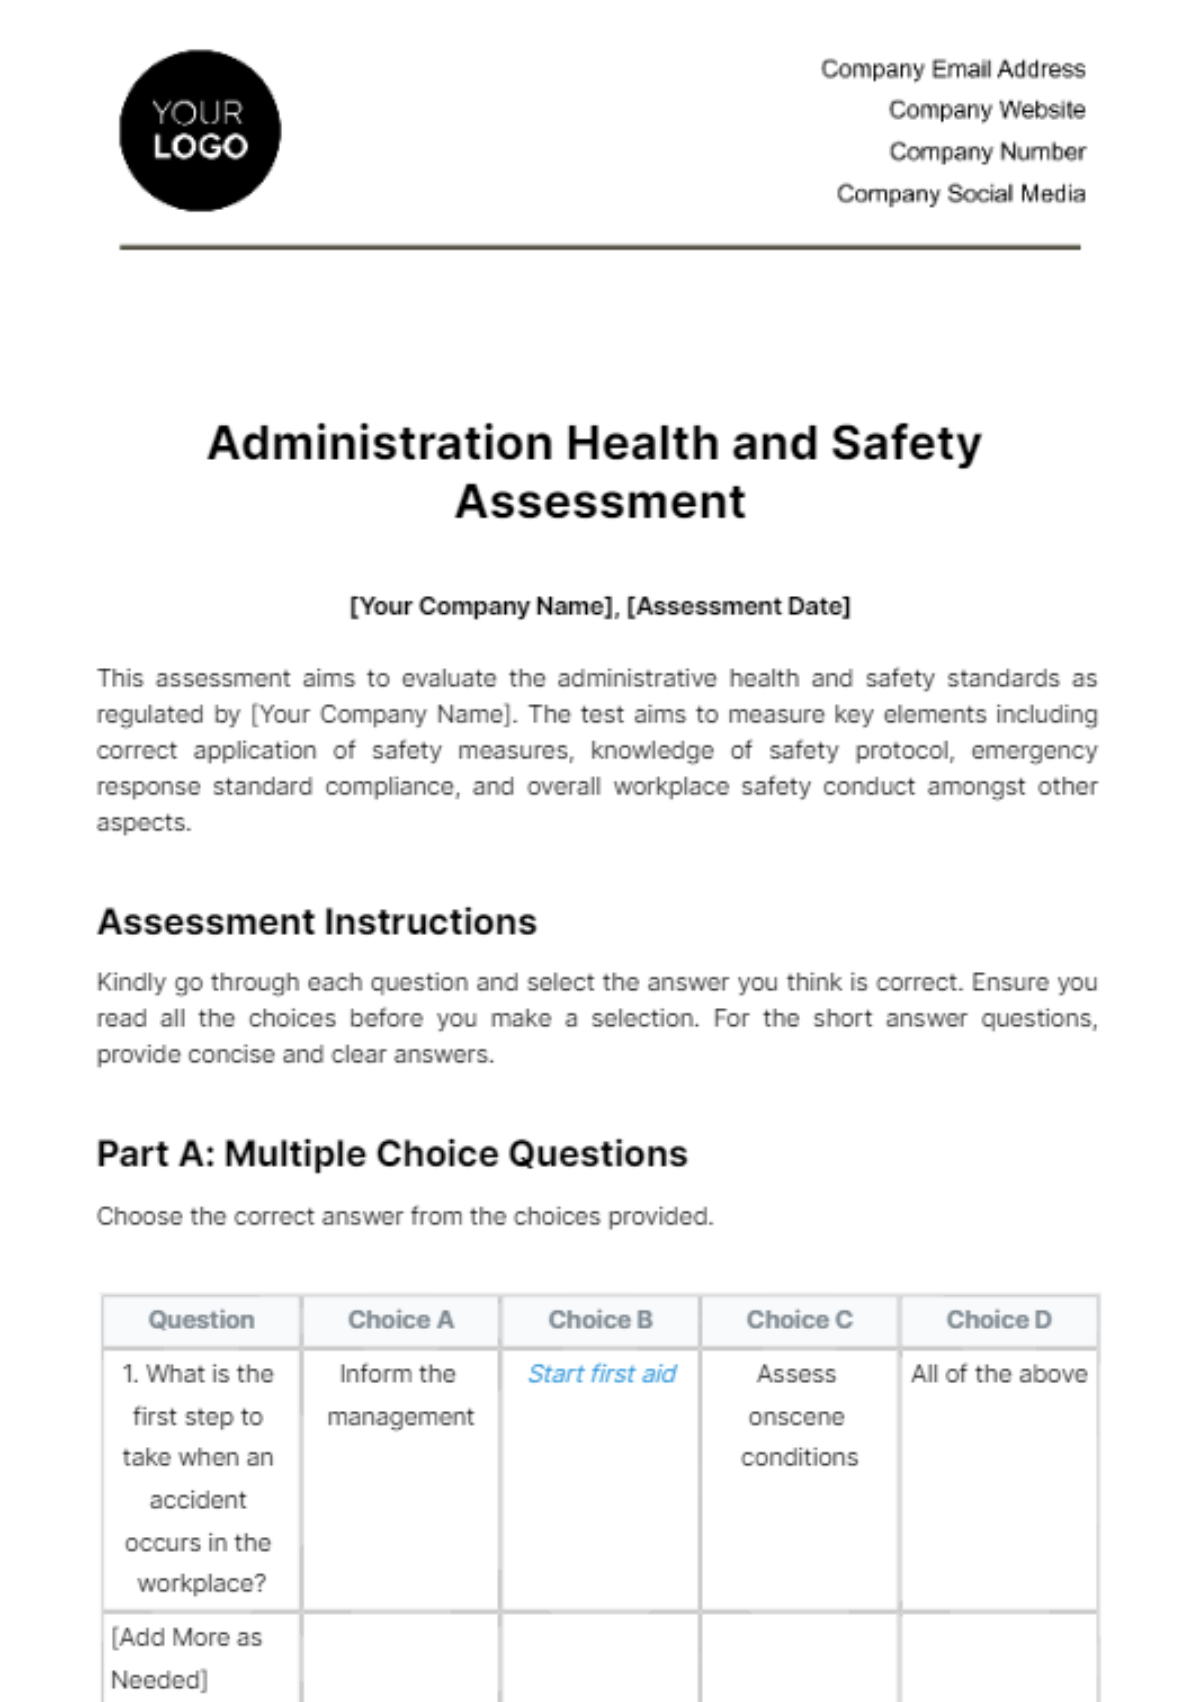 Administration Health and Safety Assessment Template